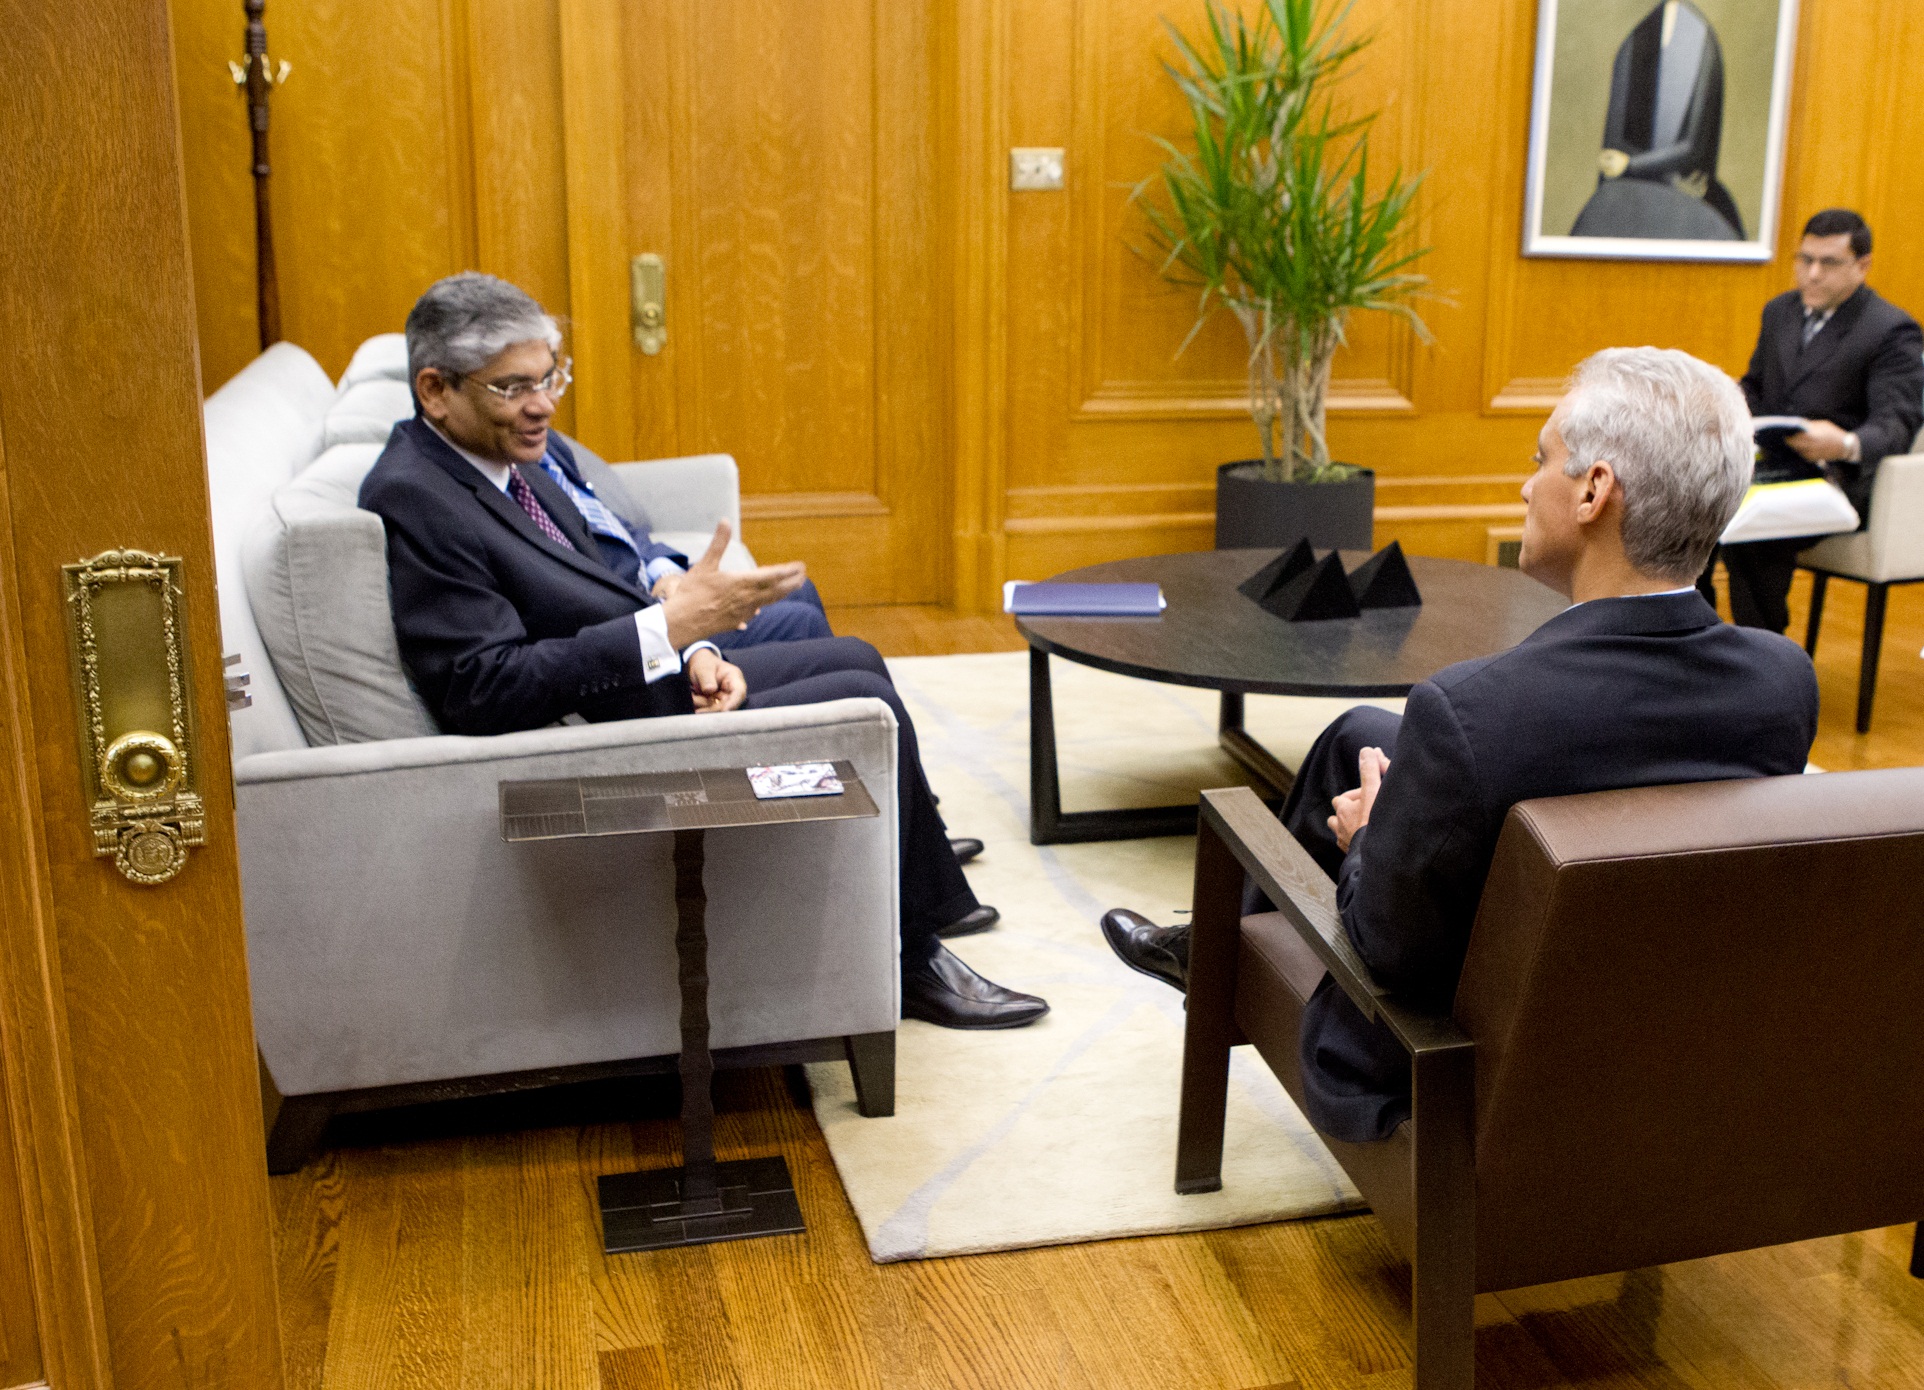 Mayor Emanuel Welcomes to Chicago Arun Kumar Singh, Indian Ambassador to the United States.